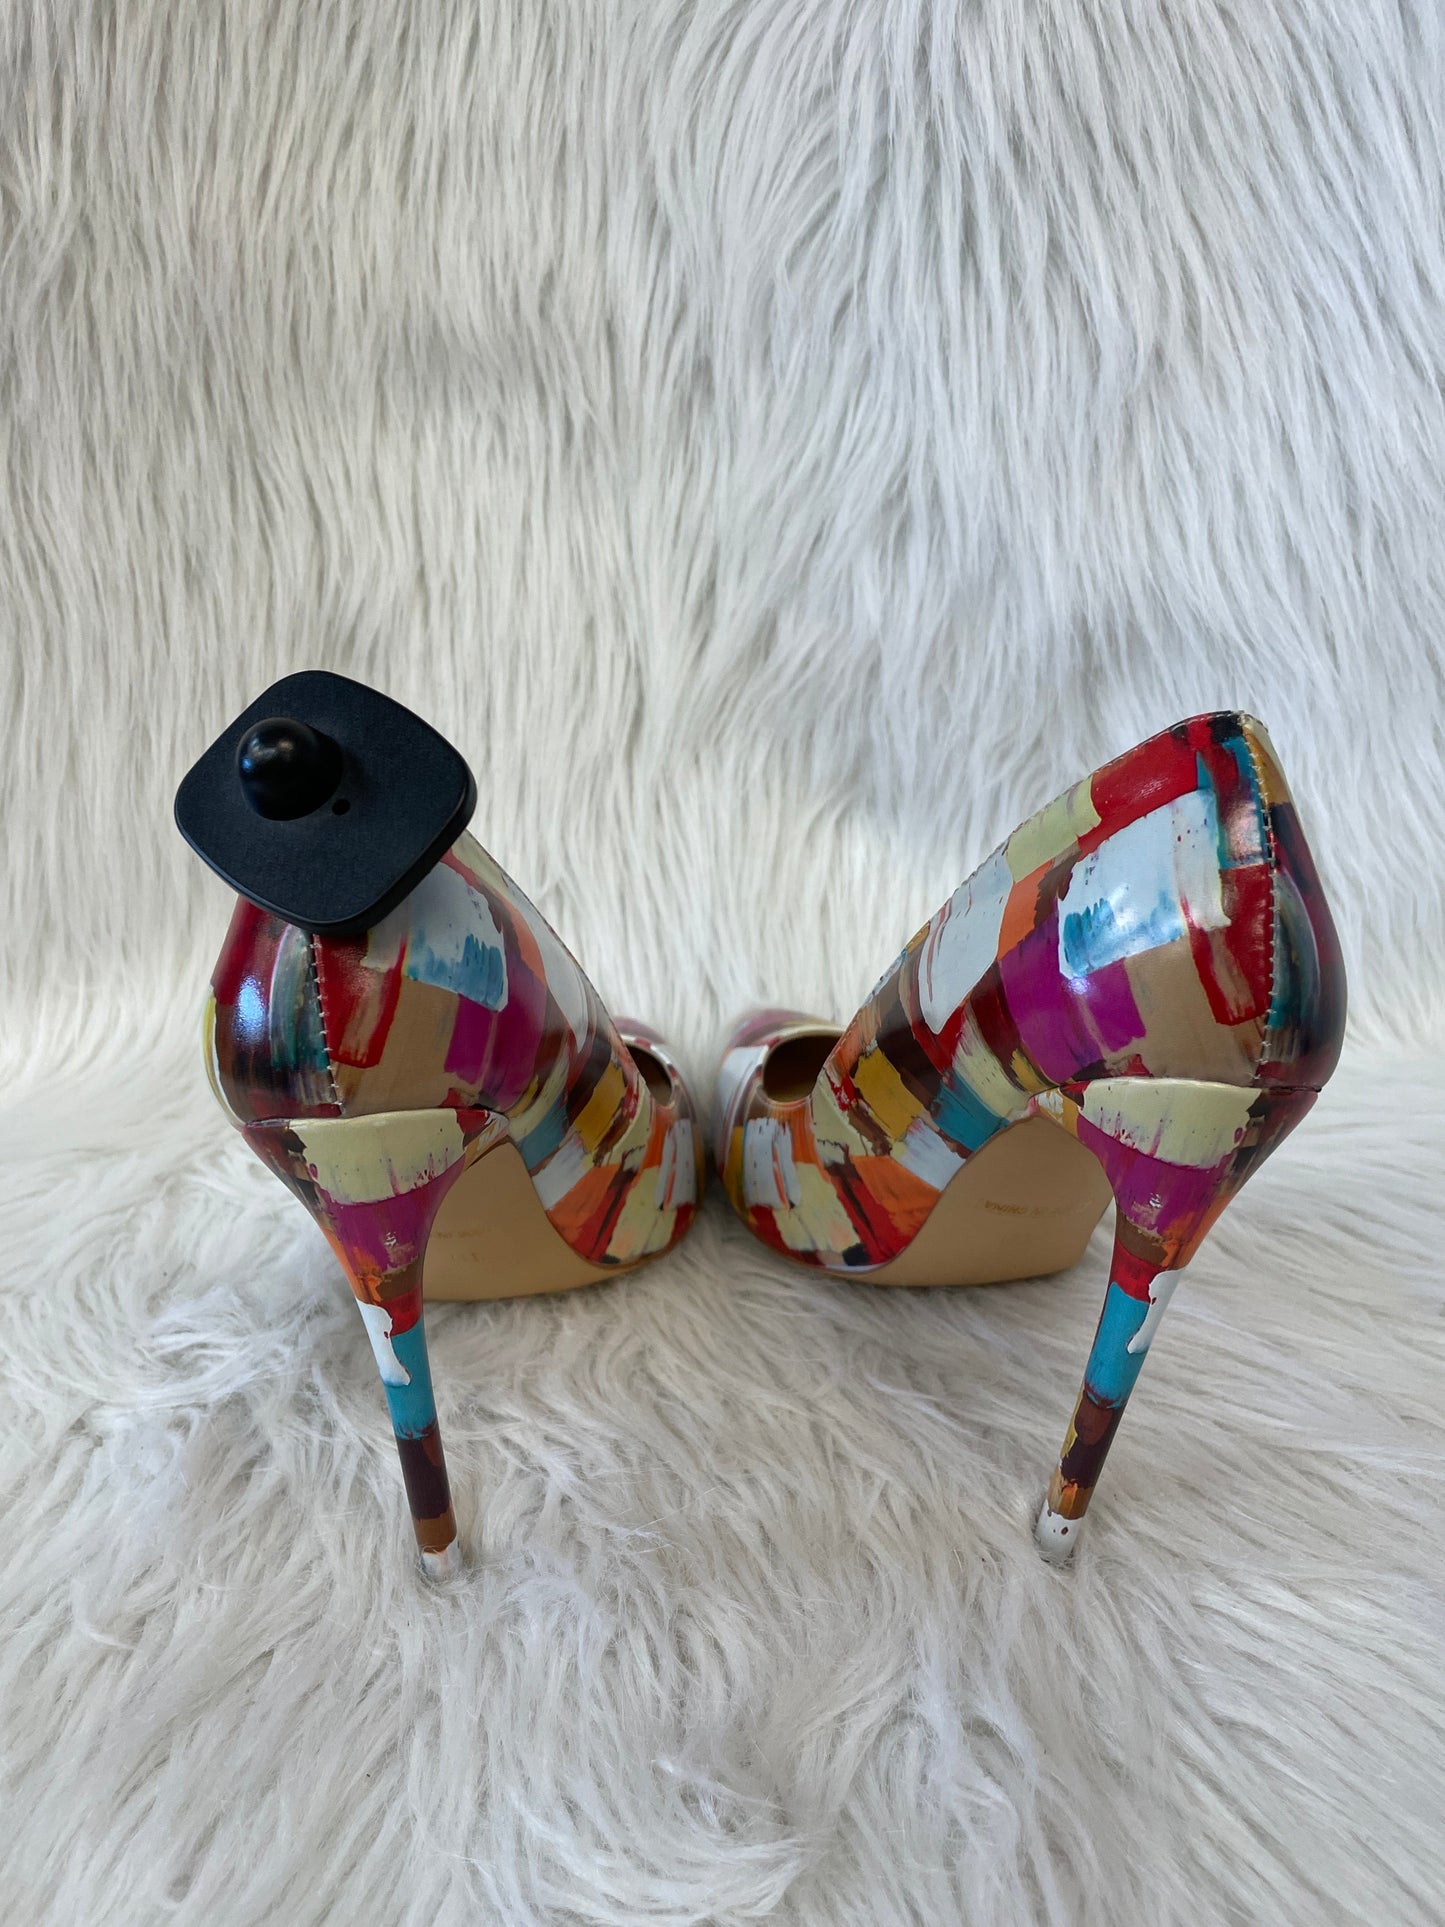 Multi-colored Shoes Heels Stiletto Clothes Mentor, Size 10